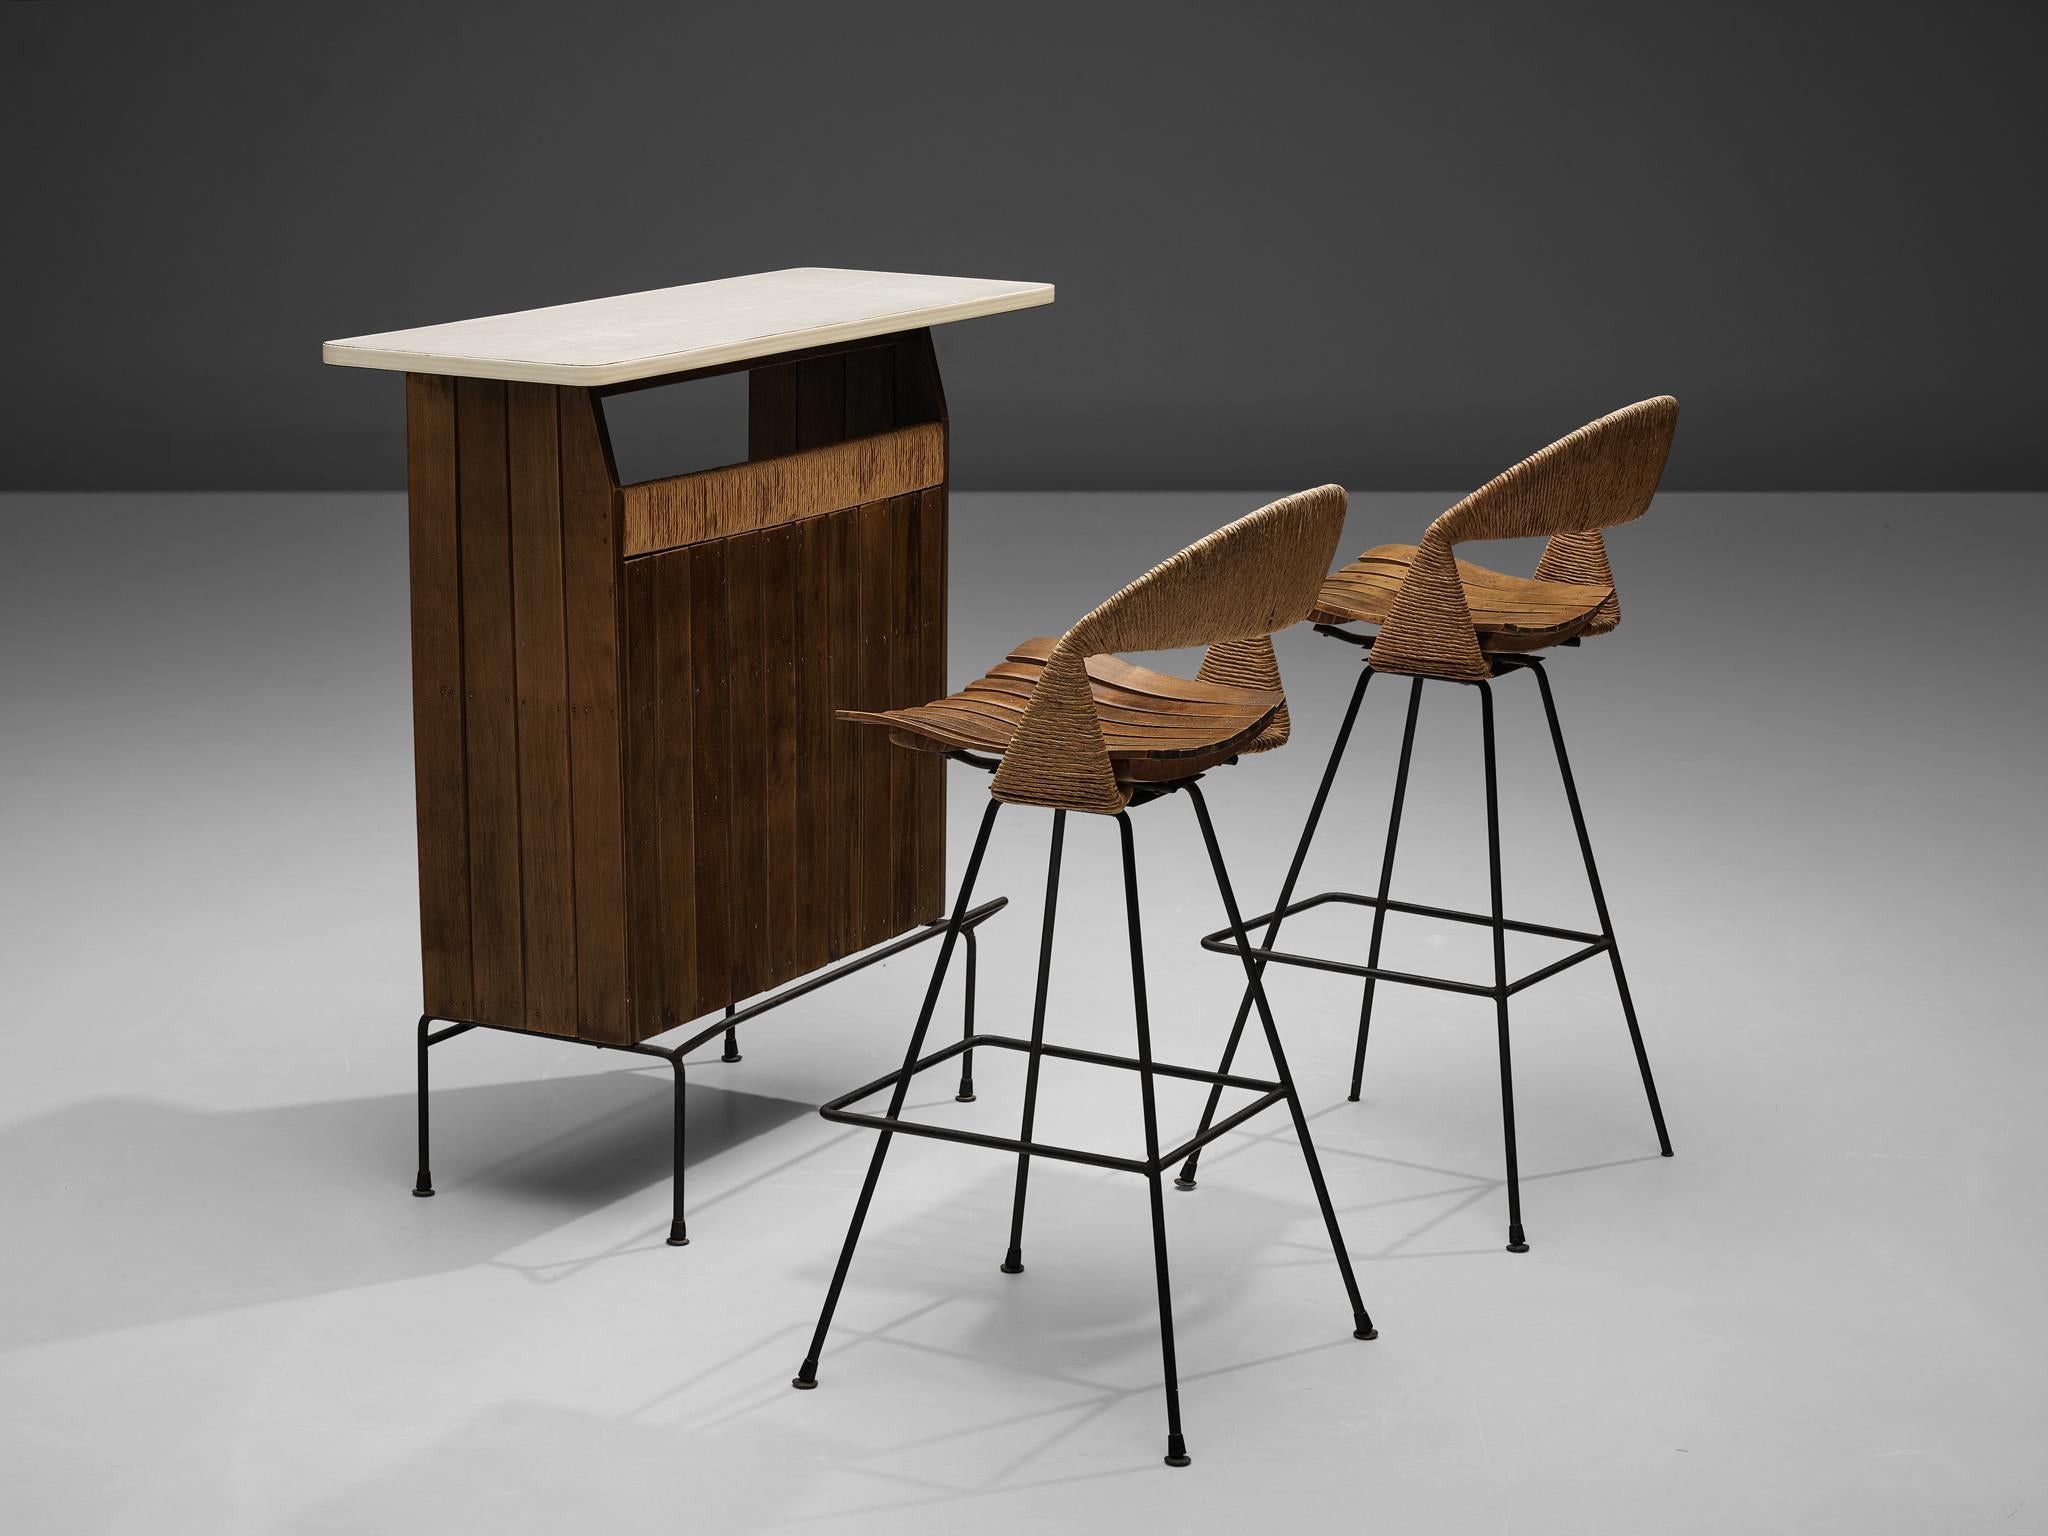 Arthur Umanoff for Raymor, dry bar, pair of bar stools, wood, iron, cane, United States, 1960s

The dry bar by Arthur Umanoff rests on a slim iron base that has a footrest in front. Vertical wooden slats end in a line highlighted in cane that flanks